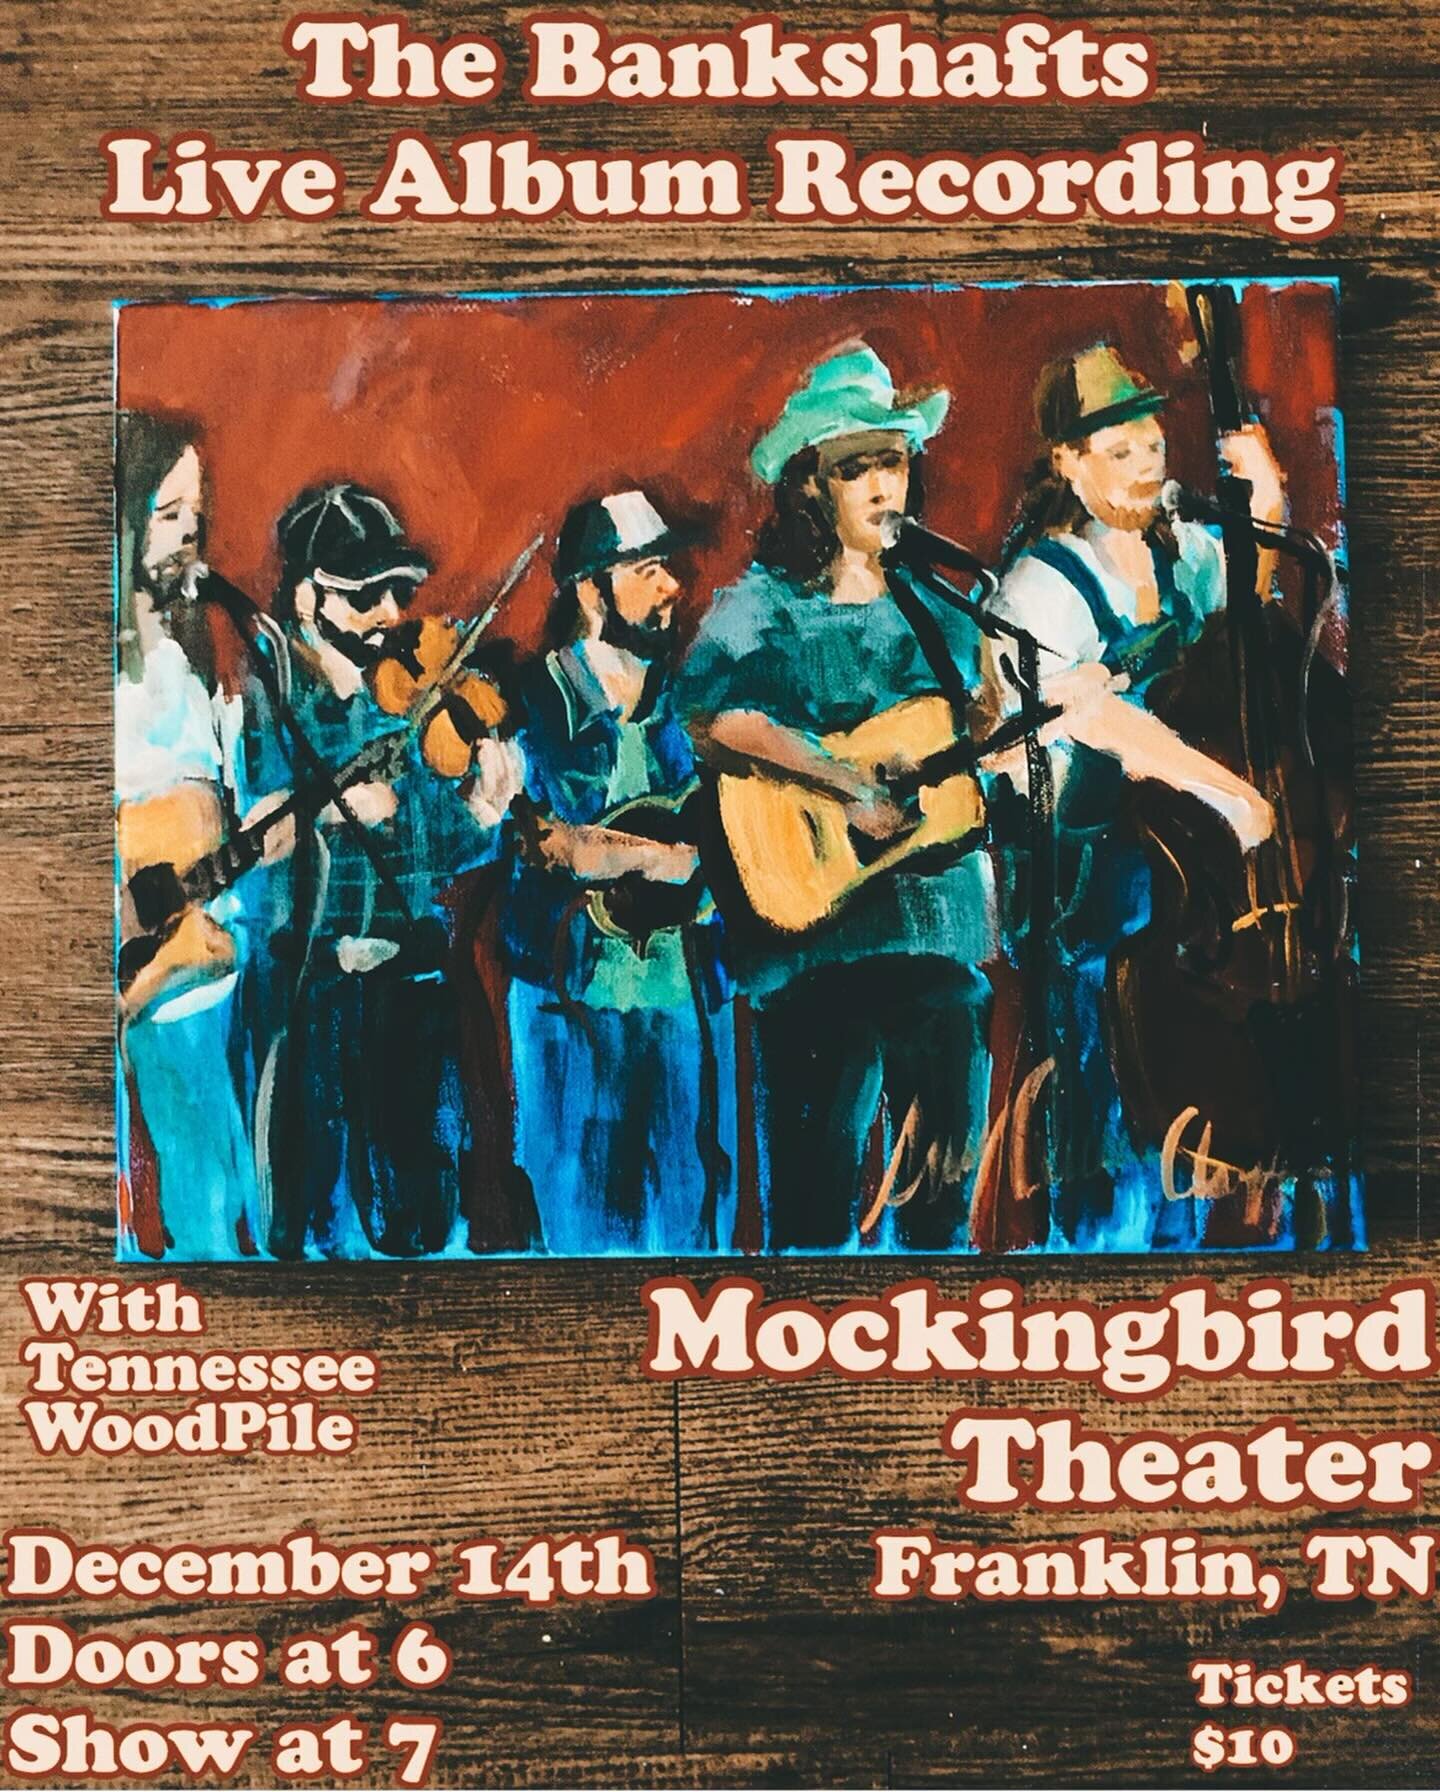 Do not miss tonight&rsquo;s show at The Bird! The Bankshafts are having a live recording tonight. Don&rsquo;t miss out on being a part of this special performance. #thefactoryatfranklin #skylightbar #franklintn #mockingbirdtheater #mojoestacos